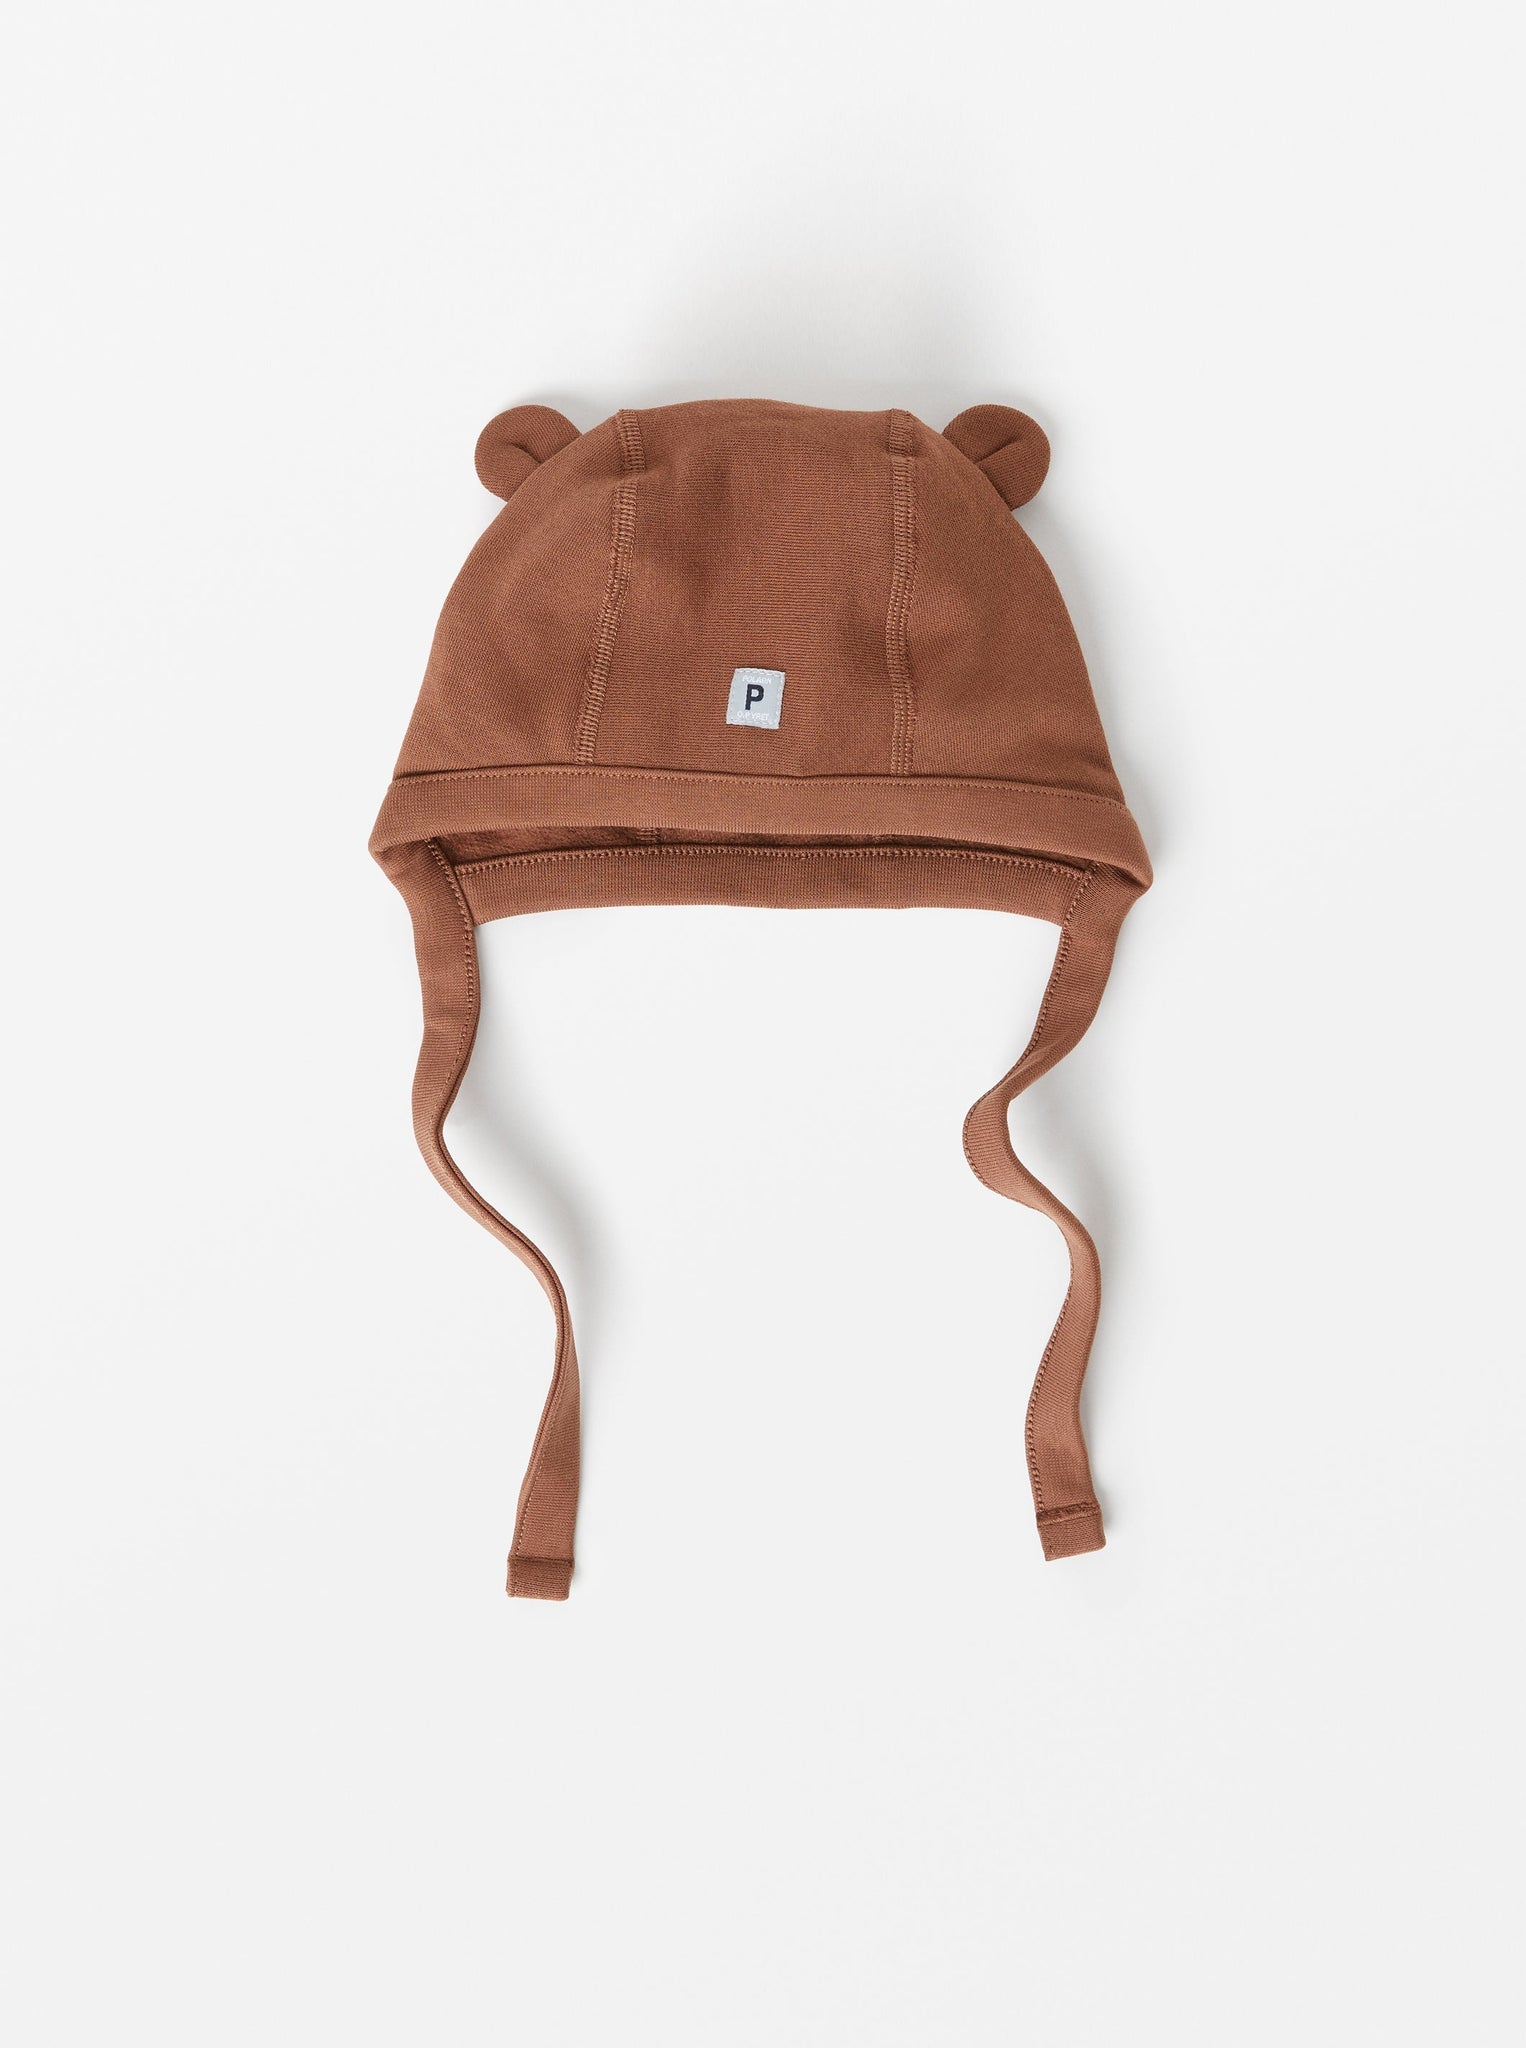 Brown Organic Cotton Baby Hat from the Polarn O. Pyret babywear collection. Clothes made using sustainably sourced materials.